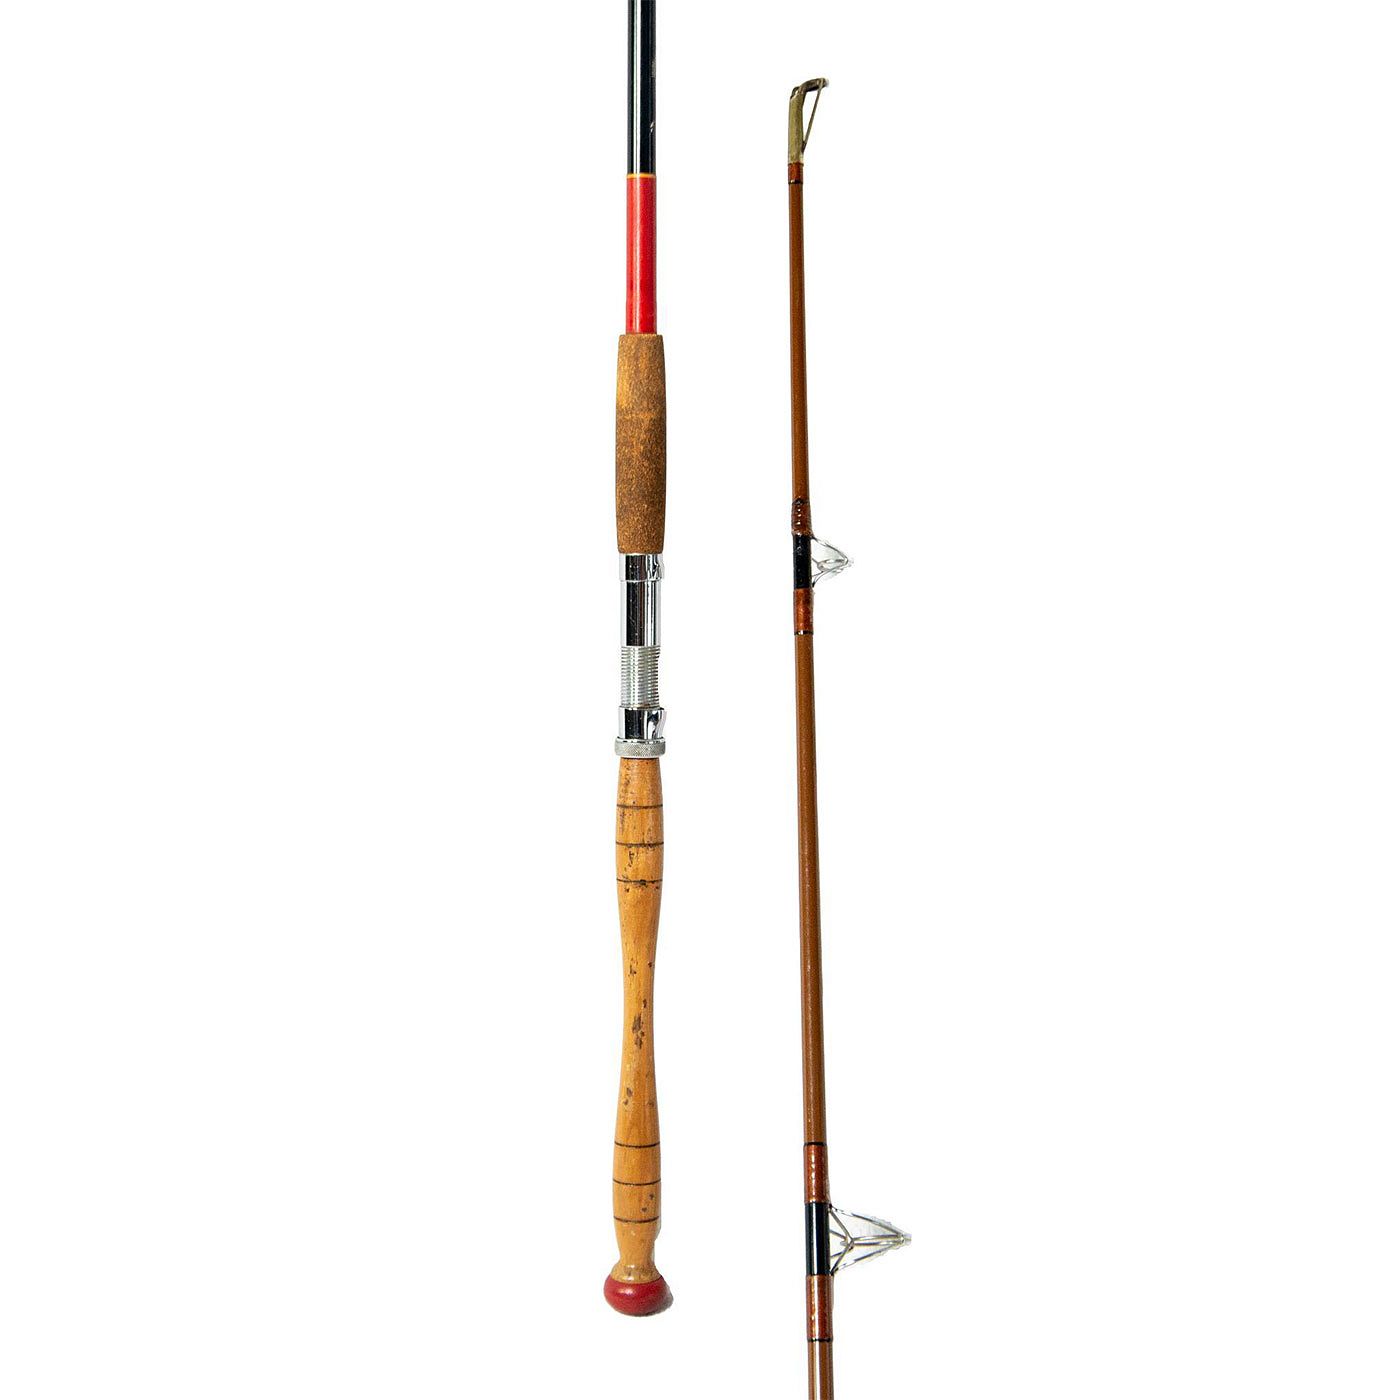 Vintage Harnell 10 Ft. Surf Rod 2pc 1-4 oz. sold at auction on 9th August